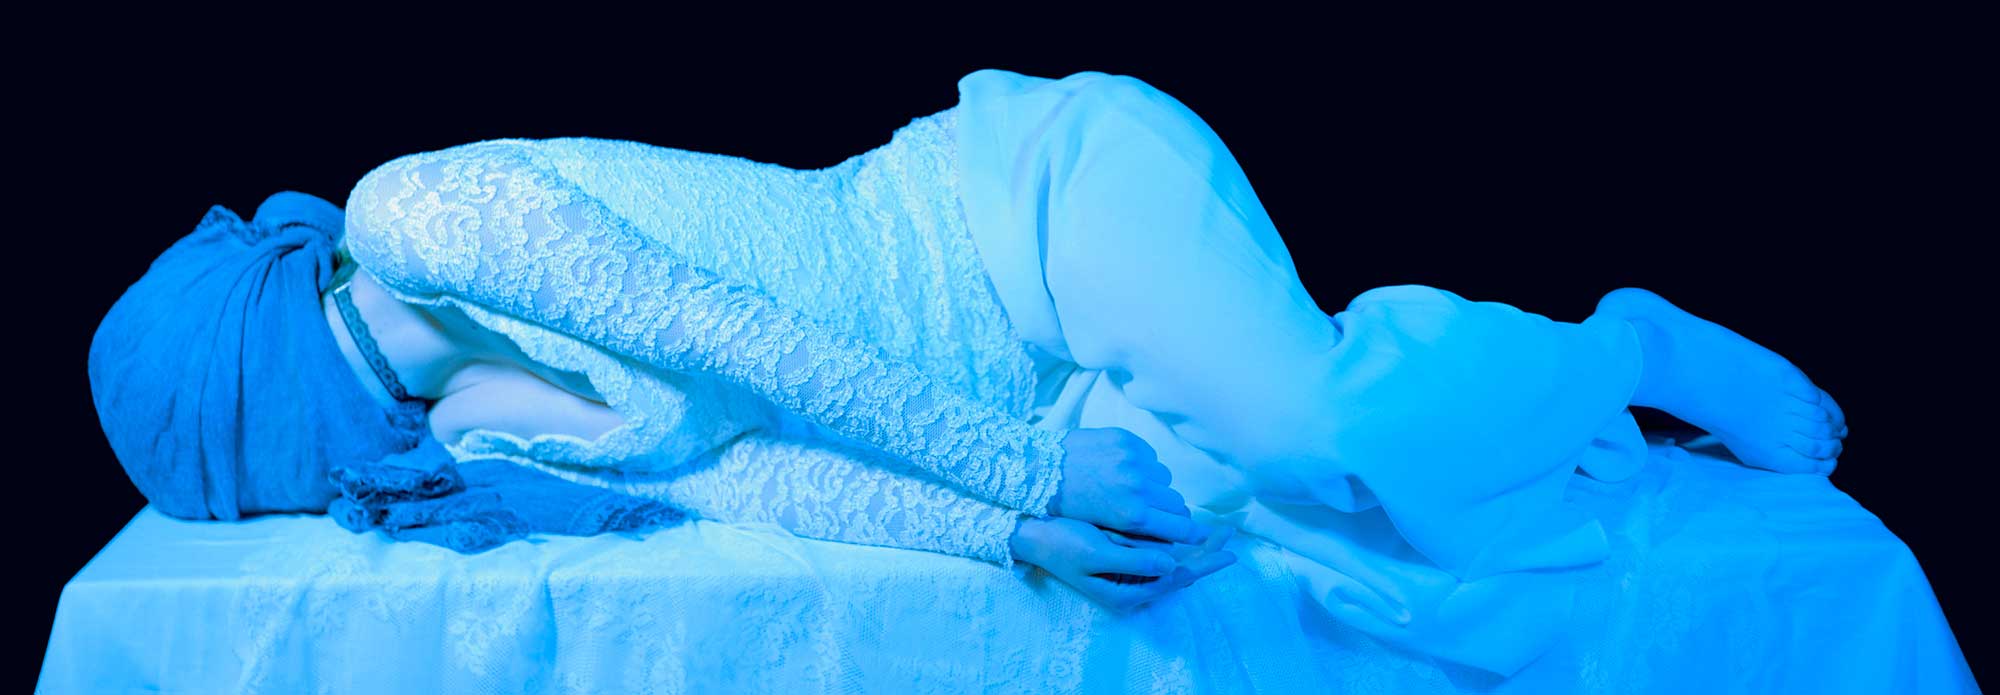 Person covered in a white cloth laying down on a pedestal 